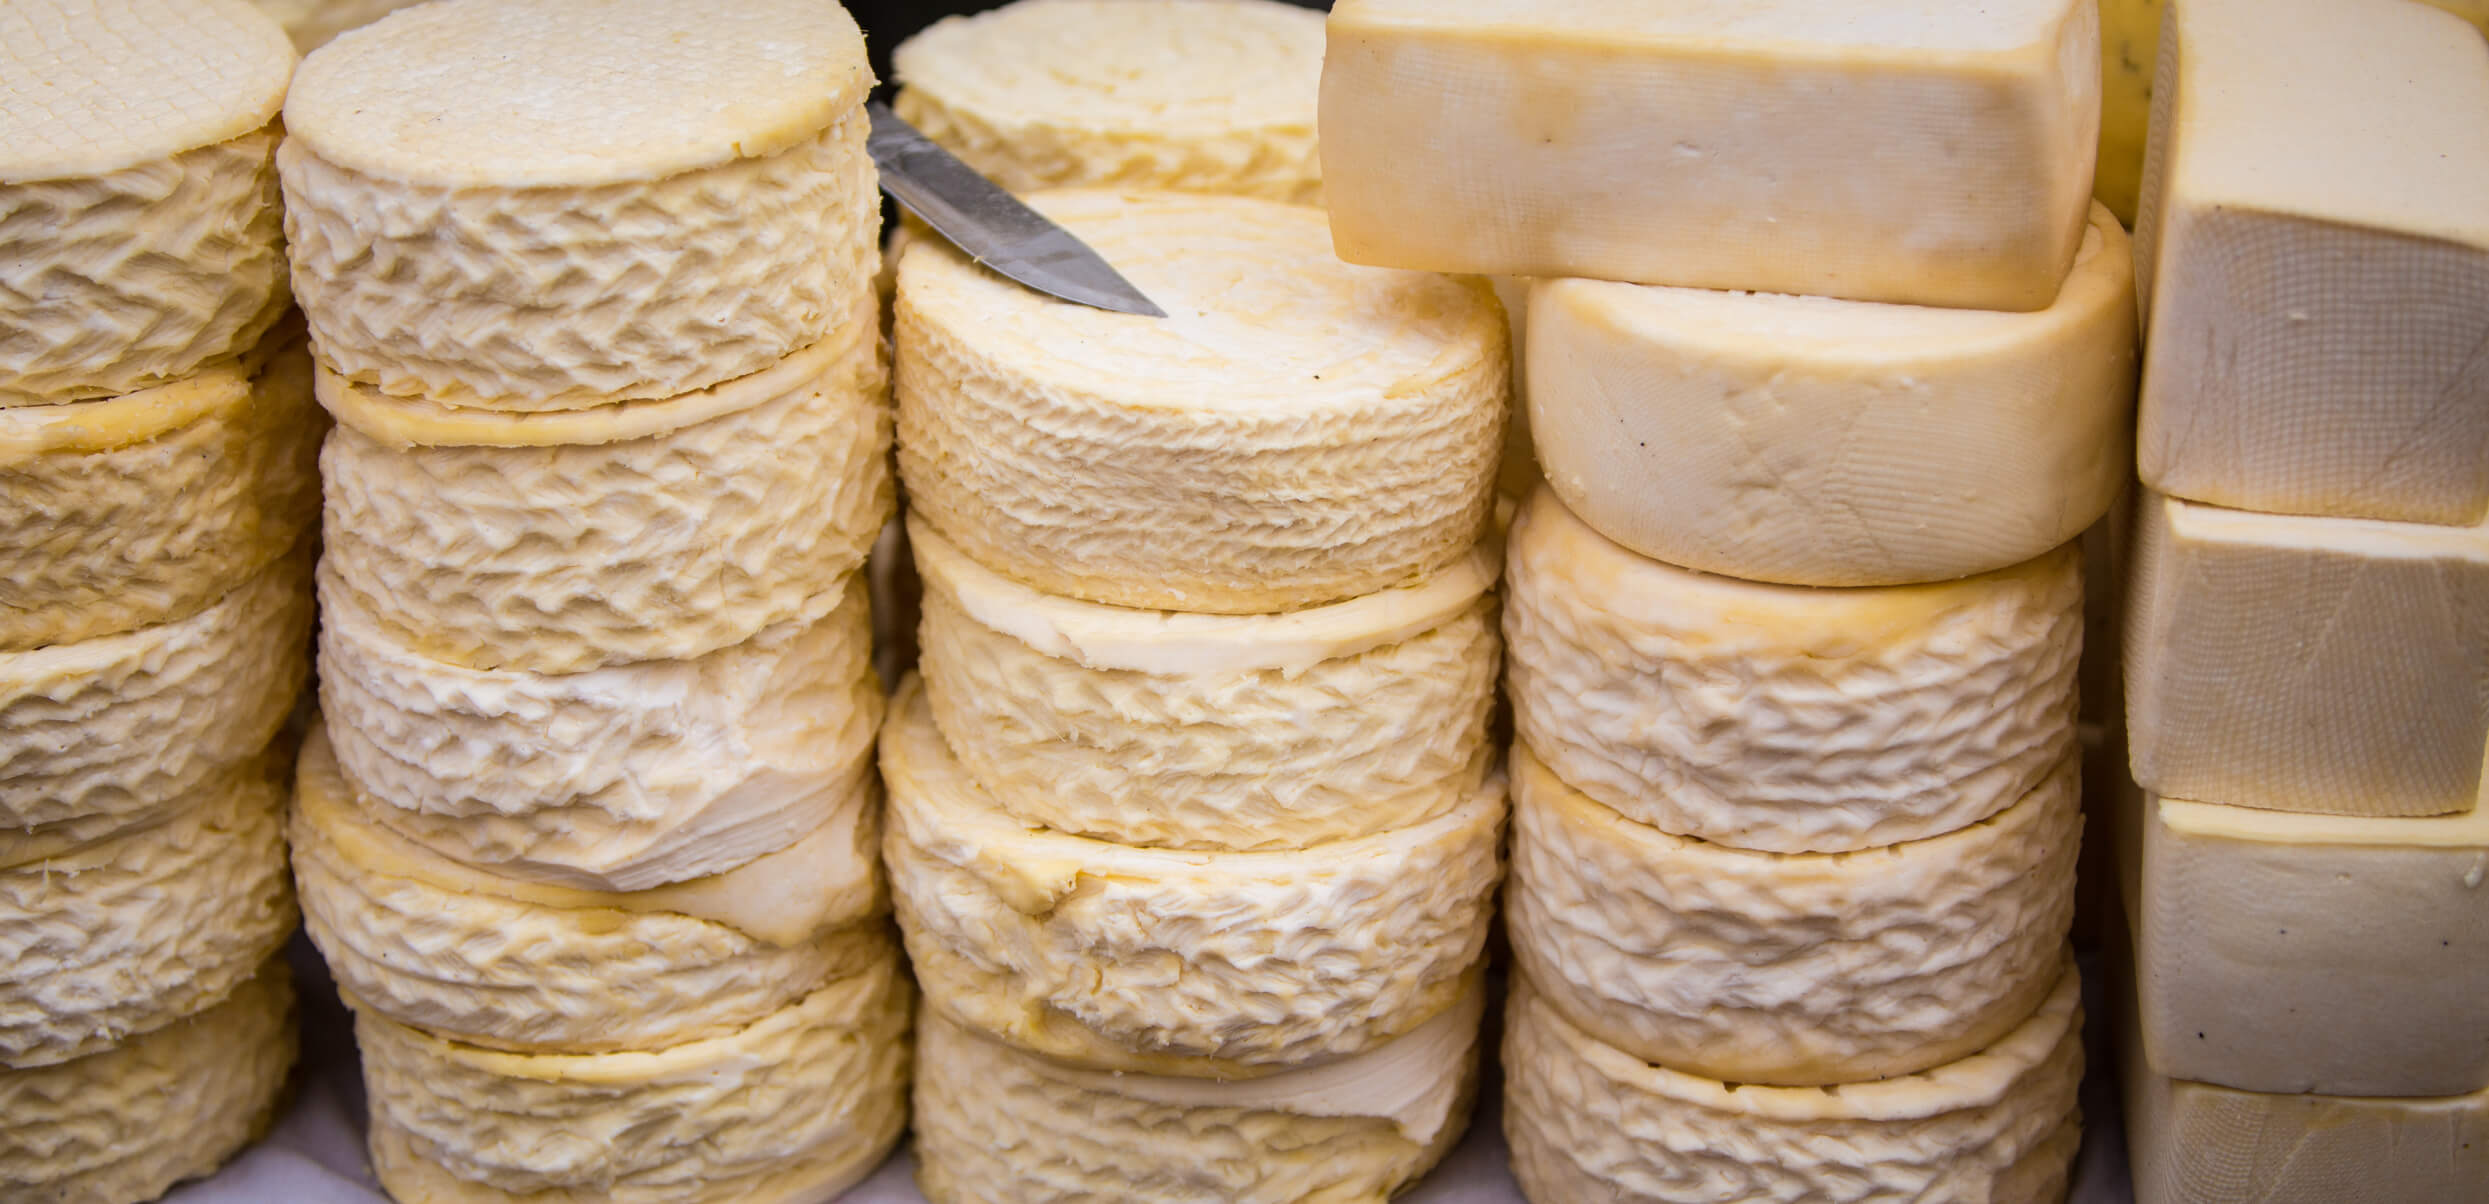 Glossary of Cheese Terms